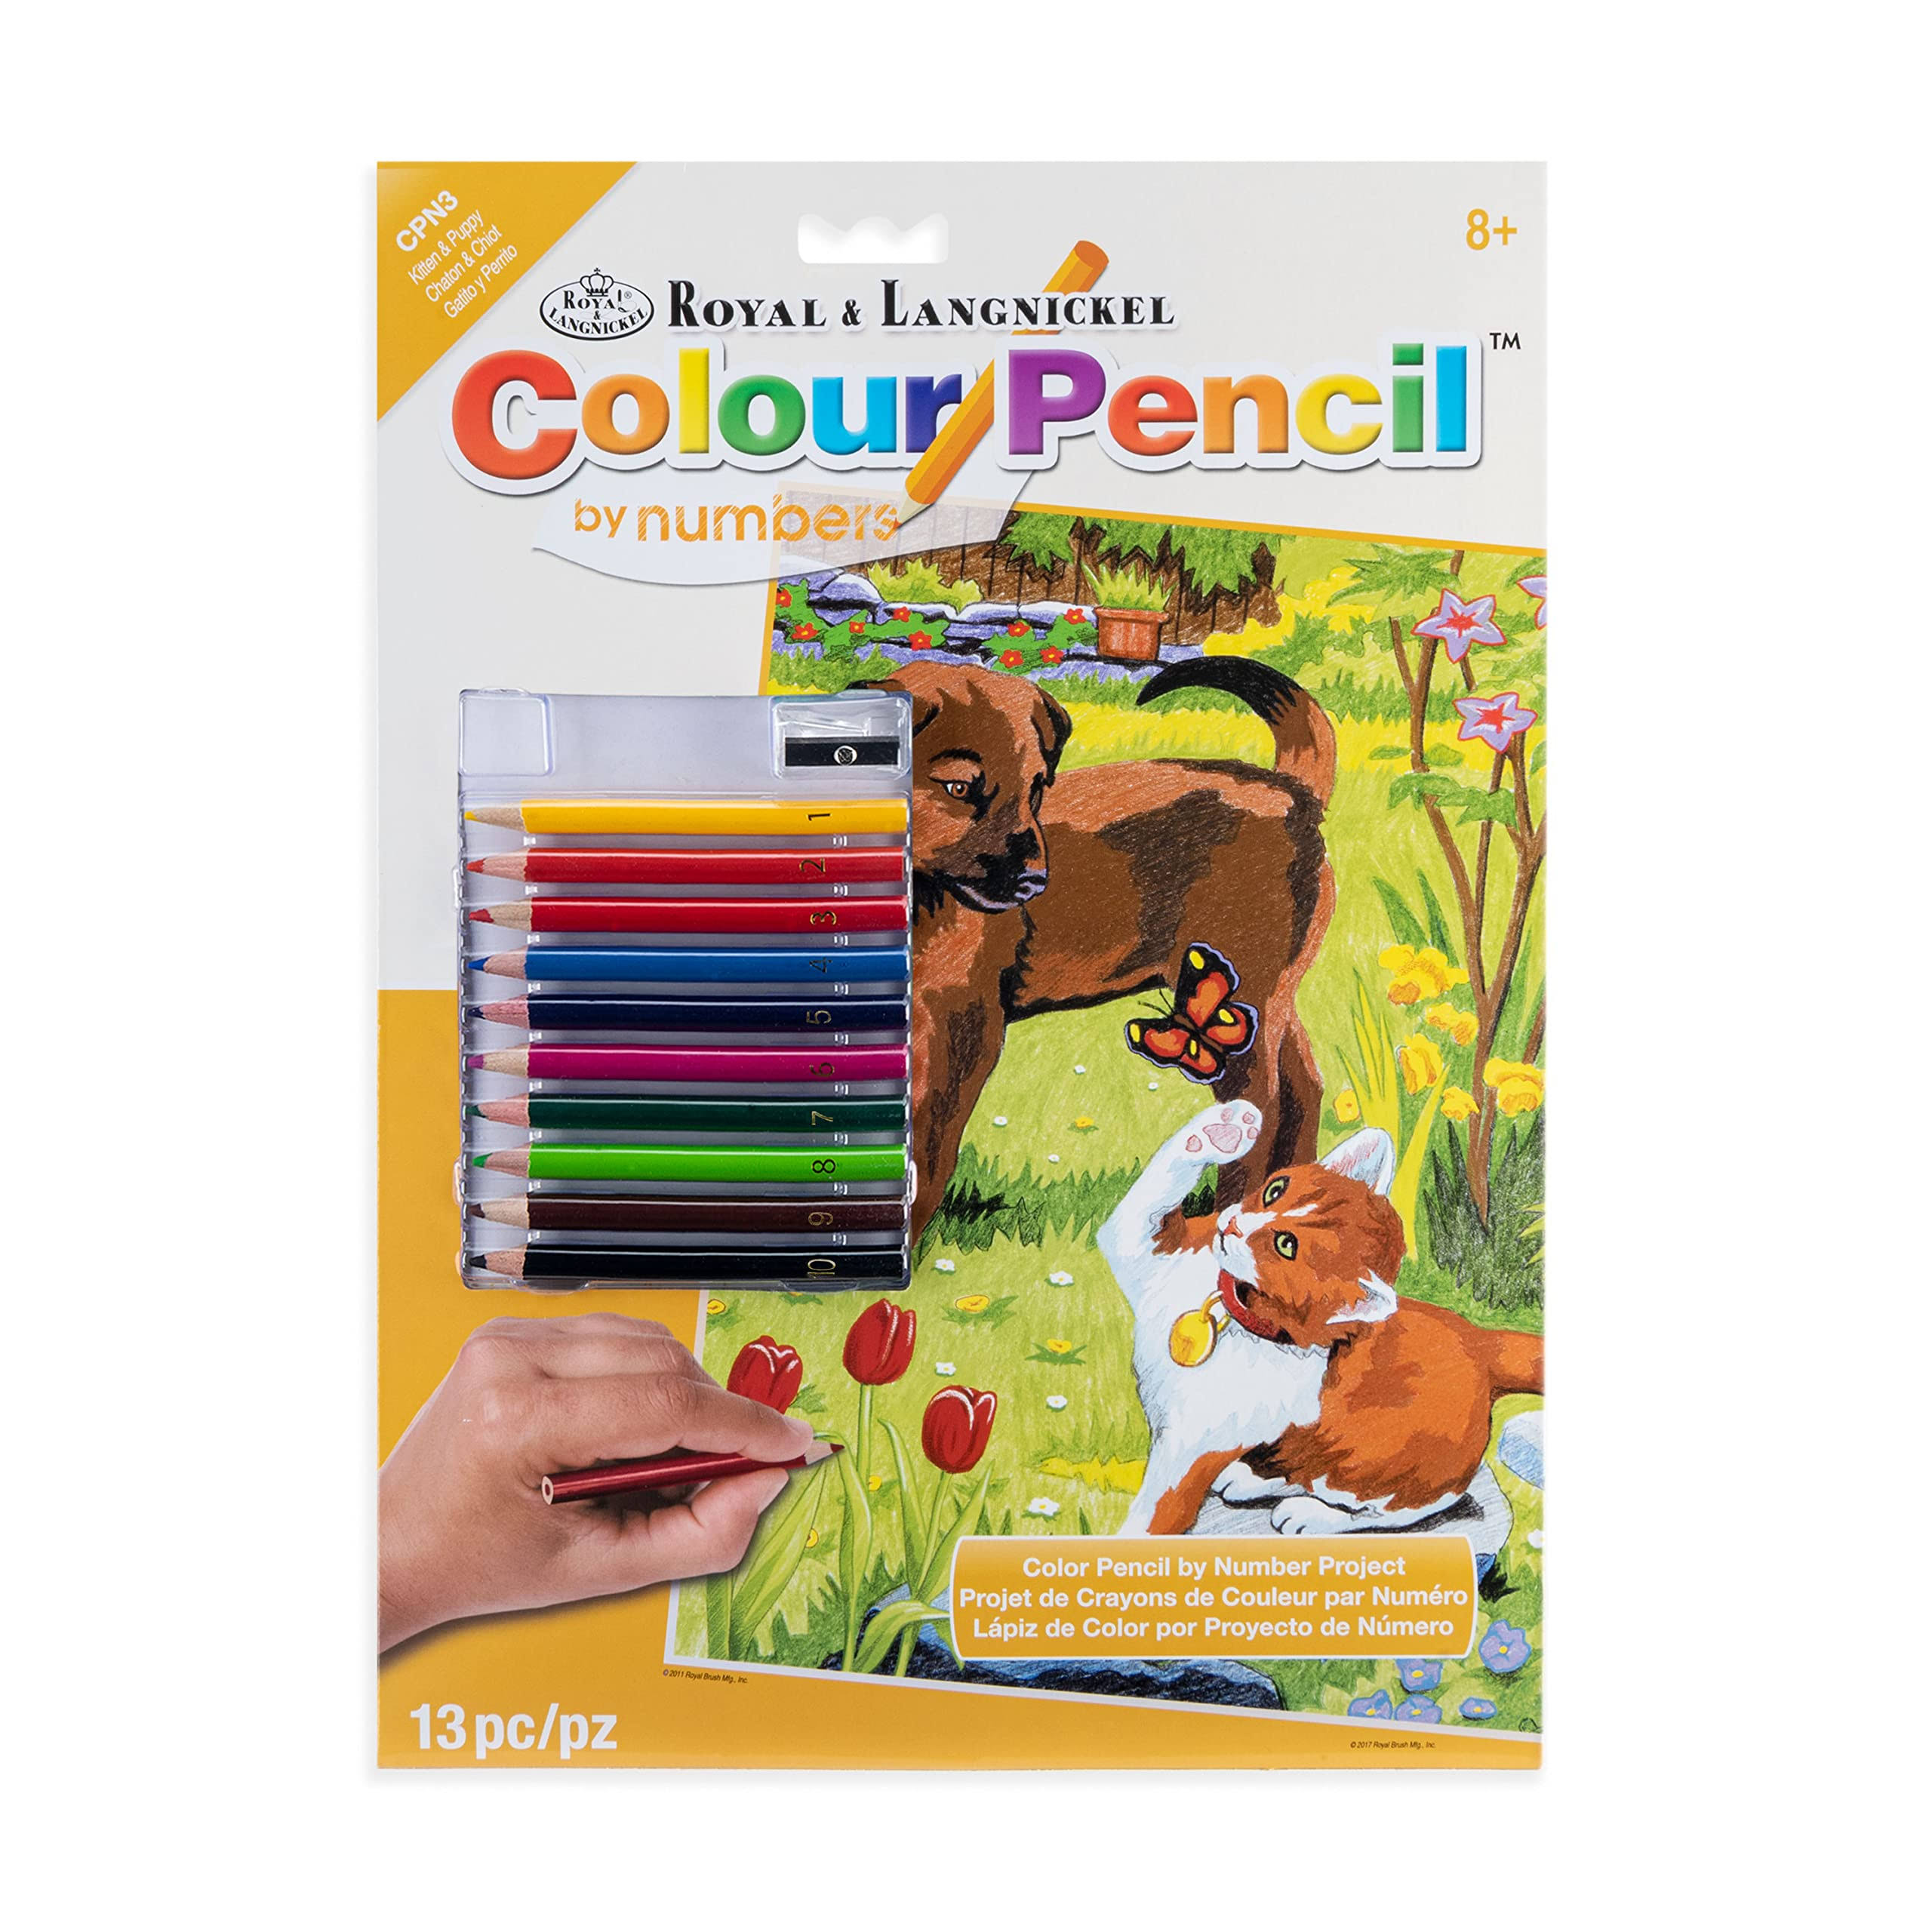 Royal and Langnickel Colour Pencil By Number Kit - 8.75" x 11.75", Kitten and Puppy